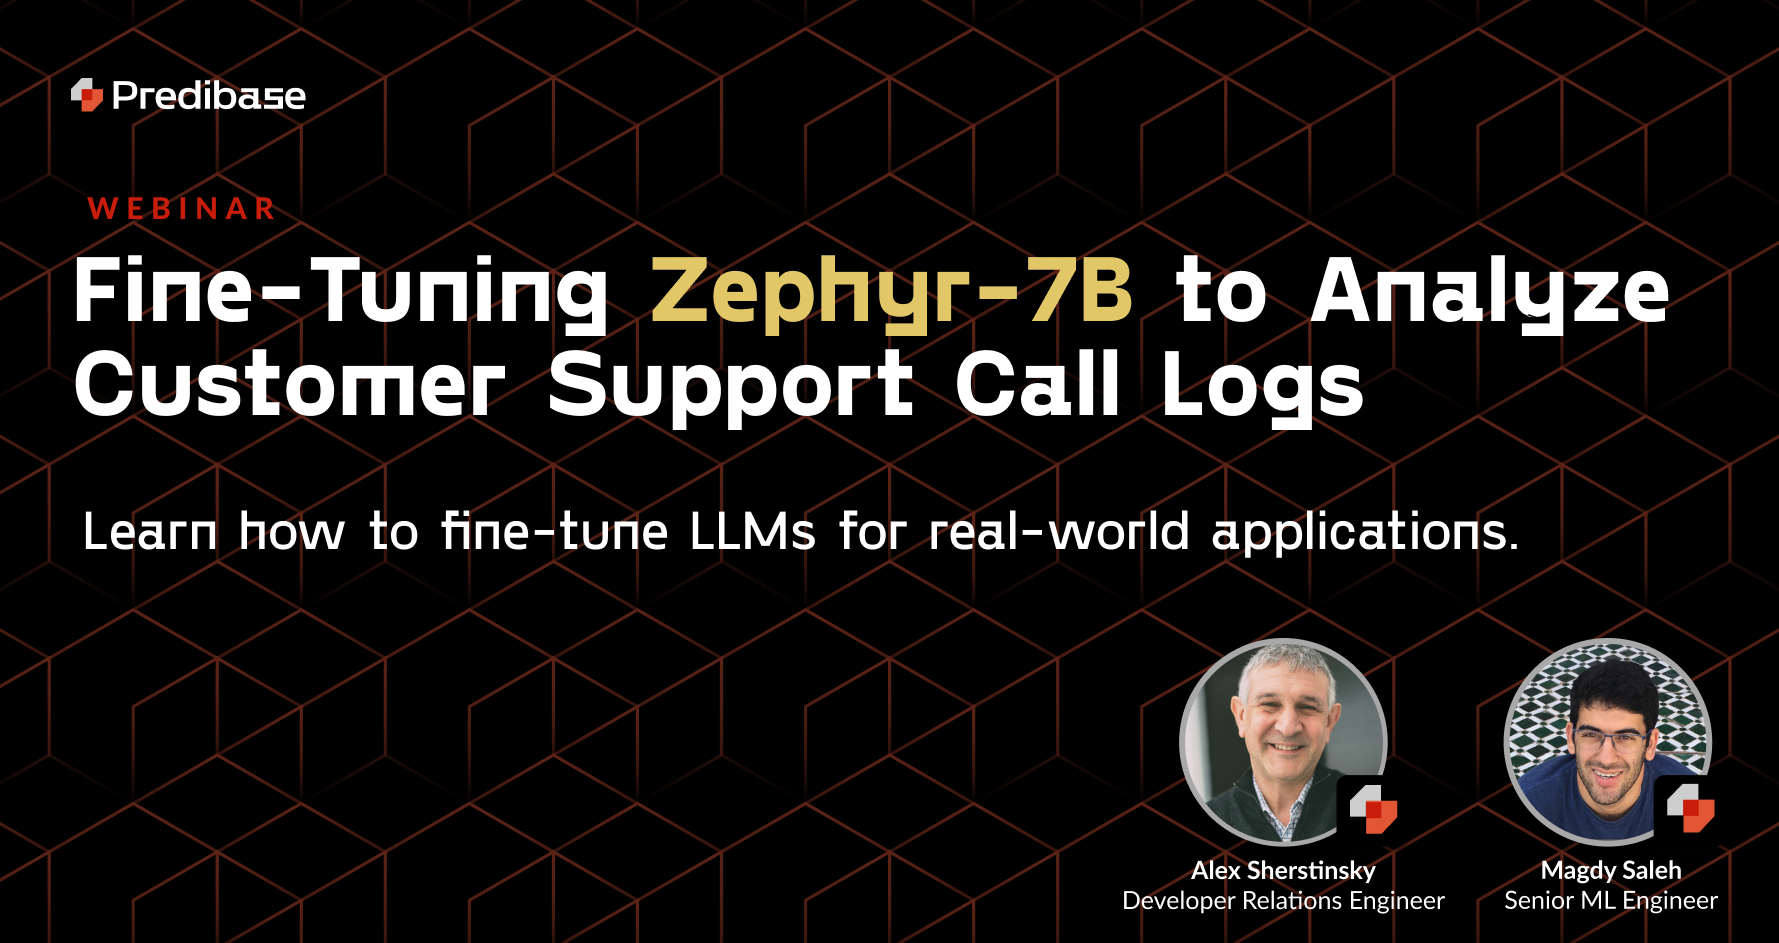 Fine-Tuning Zephyr-7B to Analyze Customer Support Call Logs